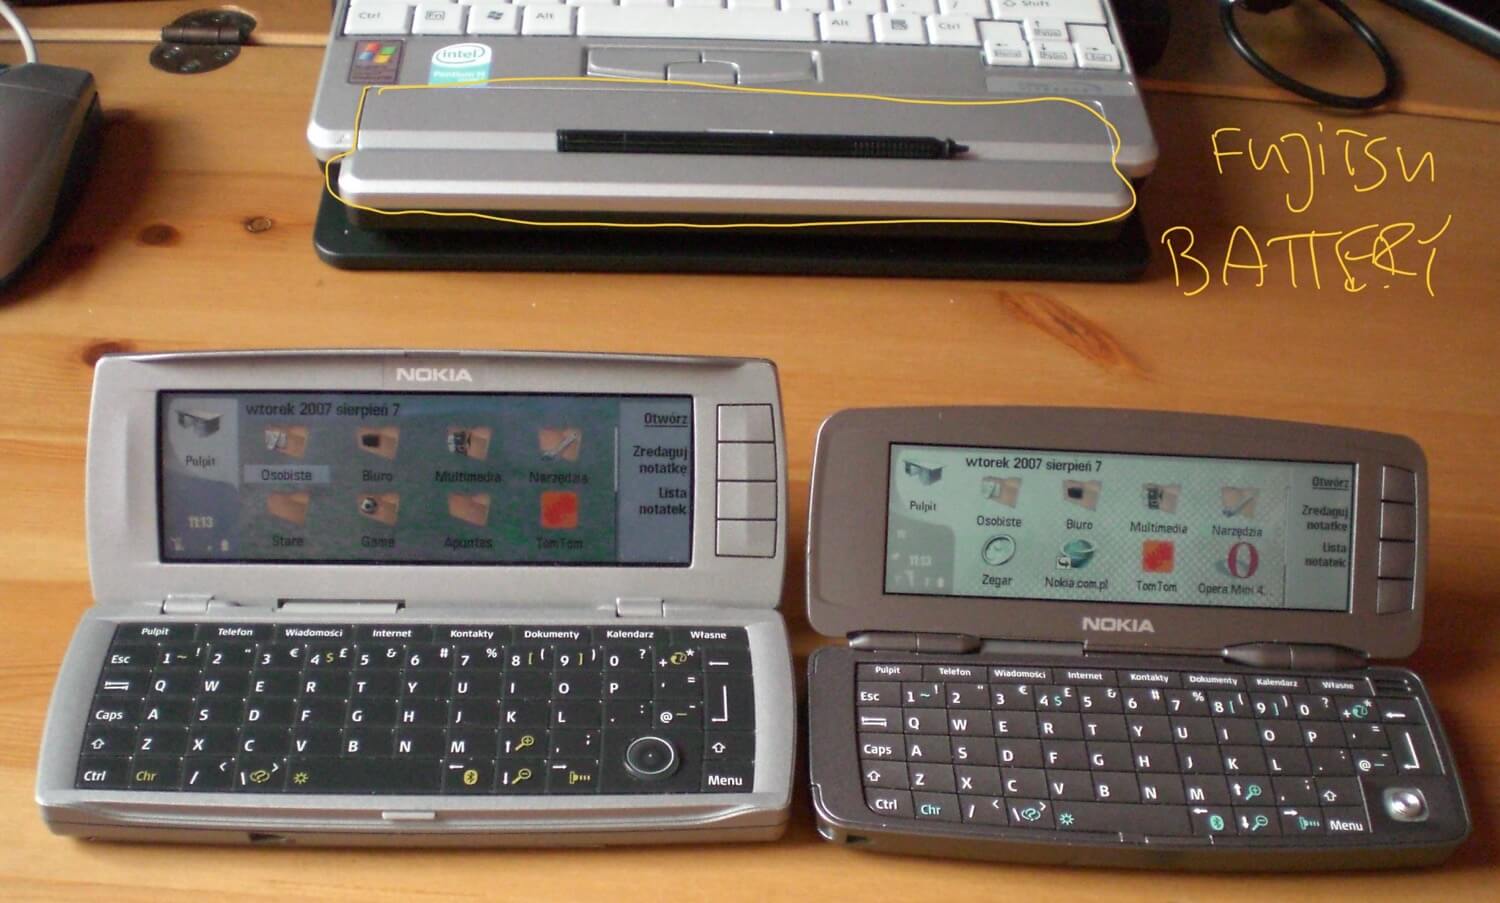 History of my 10 laptops - from 2000 and Compaq, Fujitsu, Toshiba, ThinkPad through 2008 with Apple MacBooks until now! fujitsu-battery